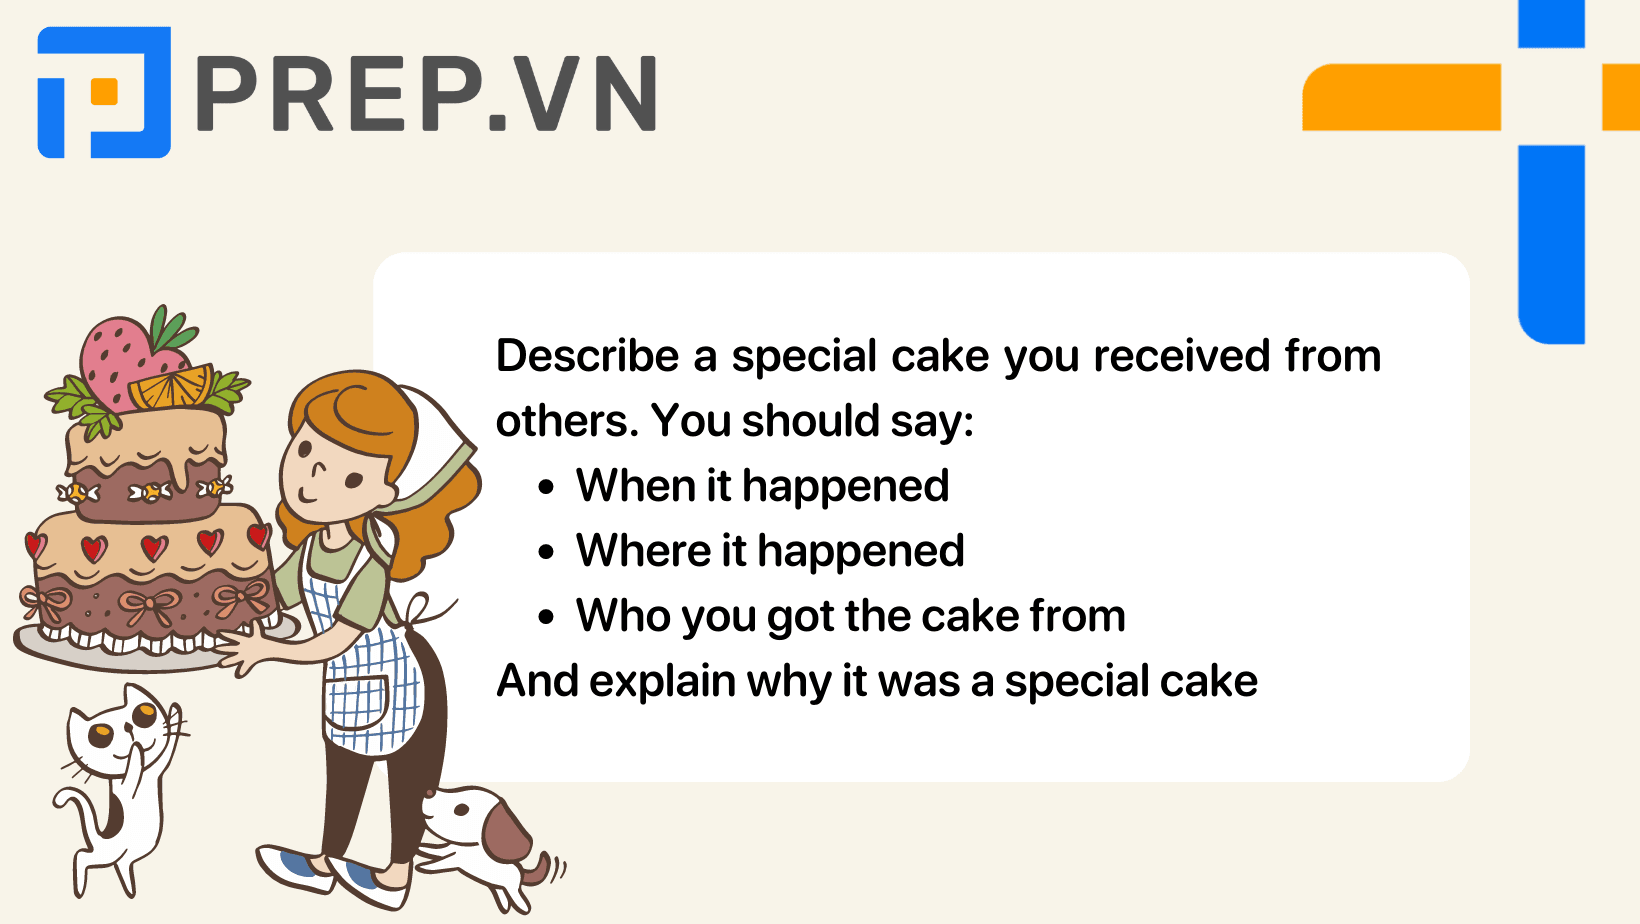 Describe a special cake you received from others